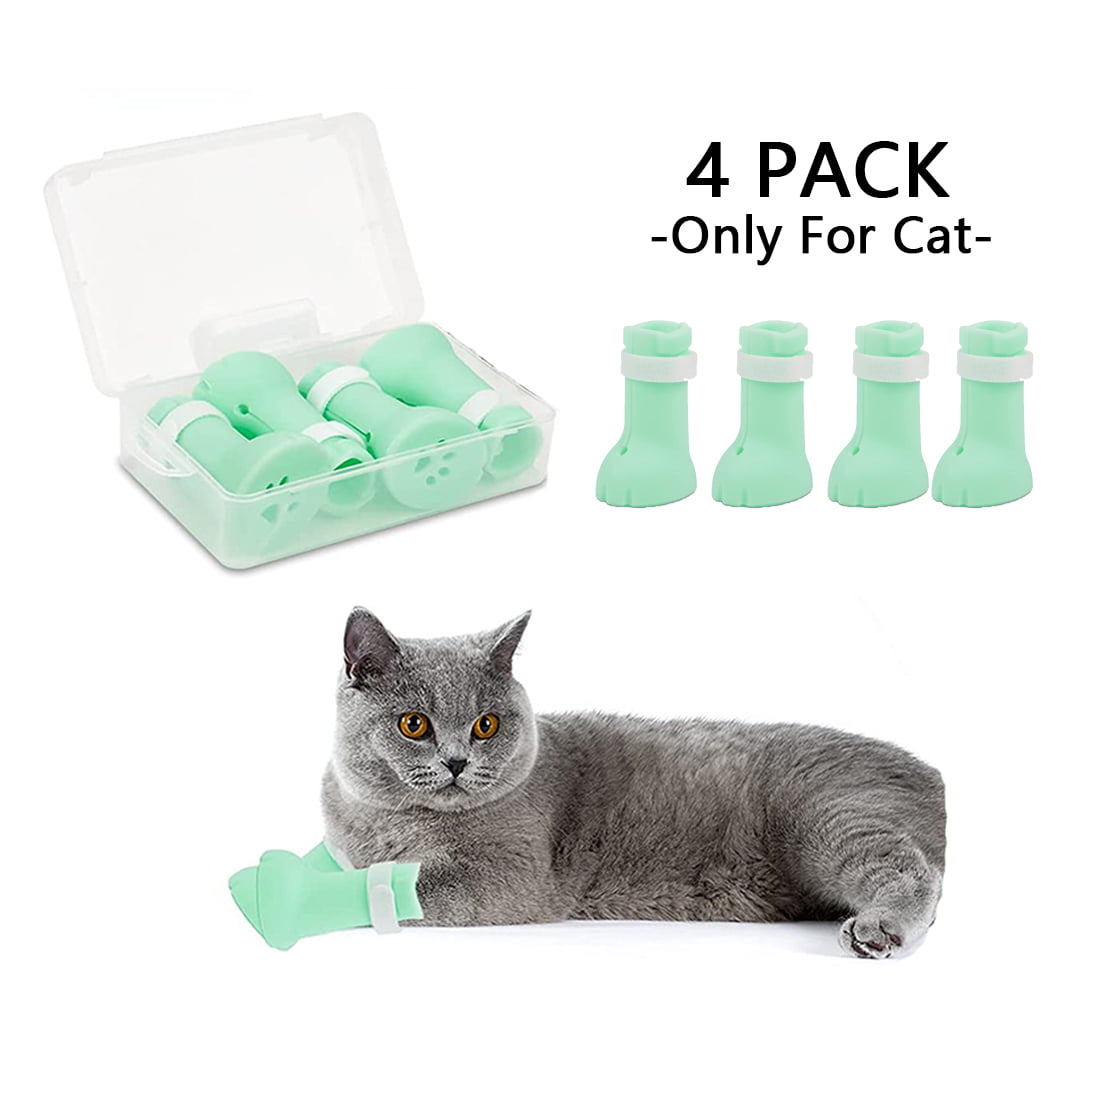 Shaving 8 Pieces Cat Anti-Scratch Shoes Silicone Cat Shoes Adjustable Cat Feet Covers Kitty Paw Covers for Bathing